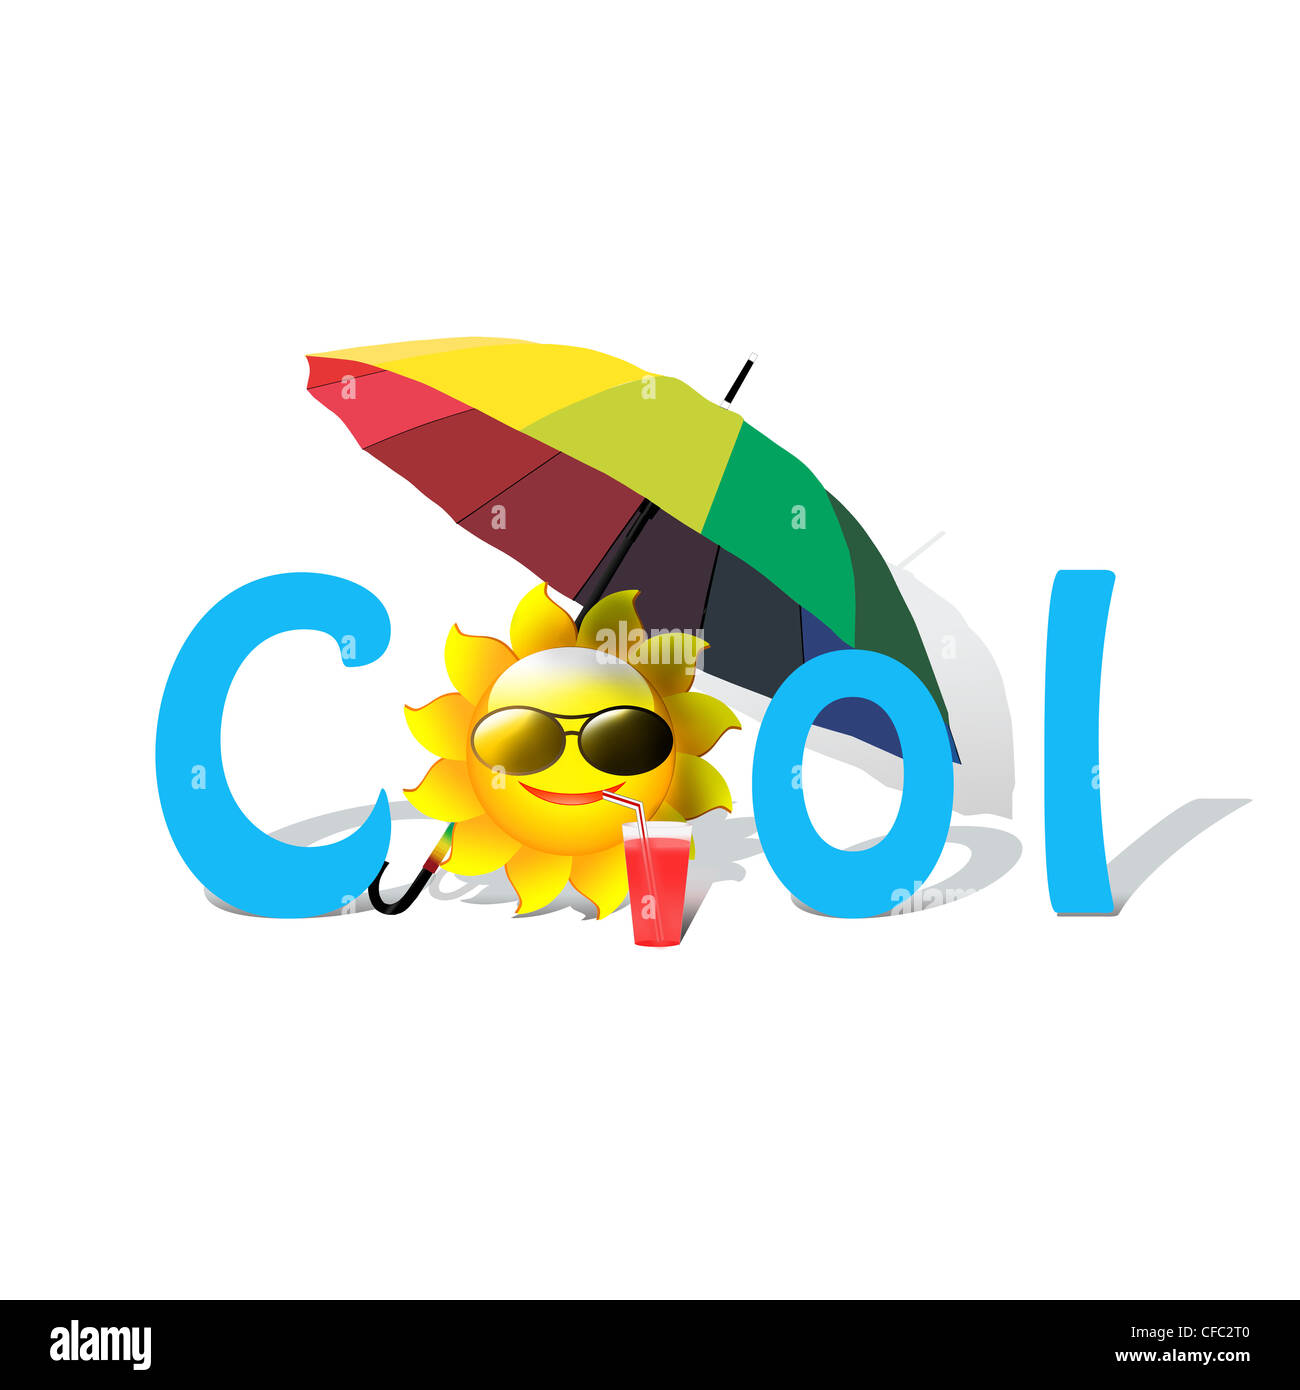 cool, coole Angebote, coole Sommer, coole Produkte, Stockfoto